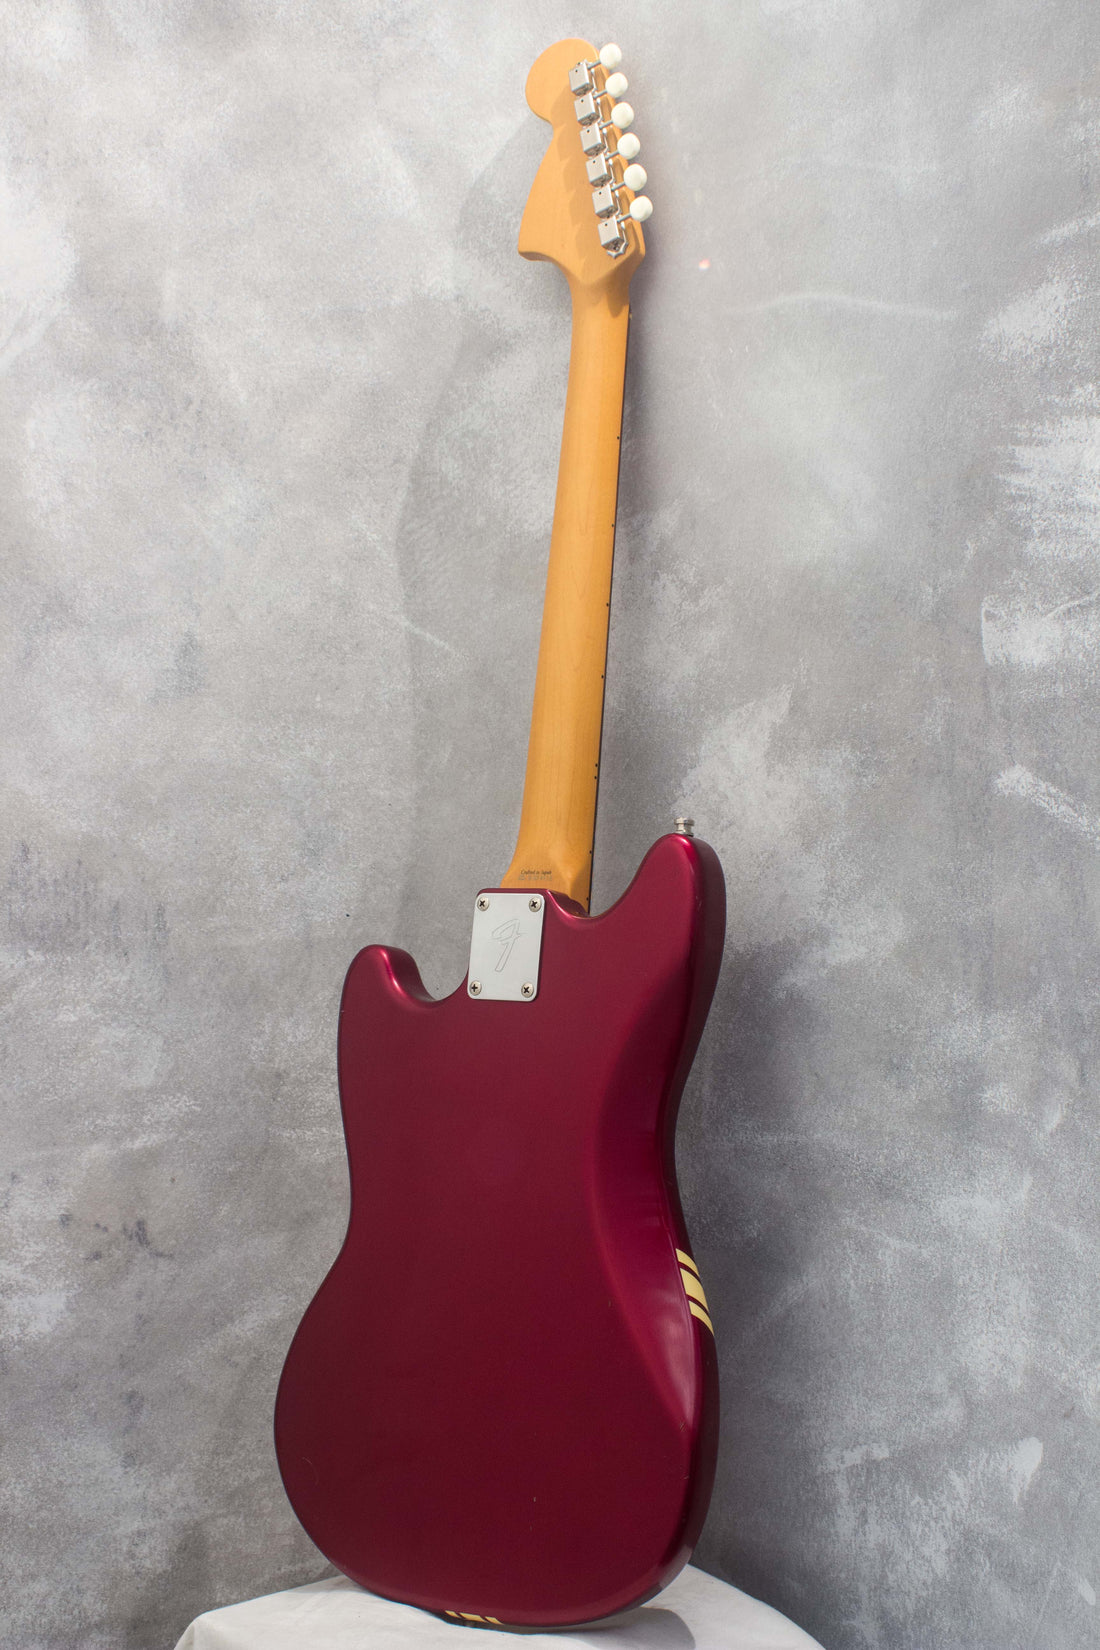 Fender Japan '73 Mustang MG73-CO Competition Old Candy Apple Red 2004